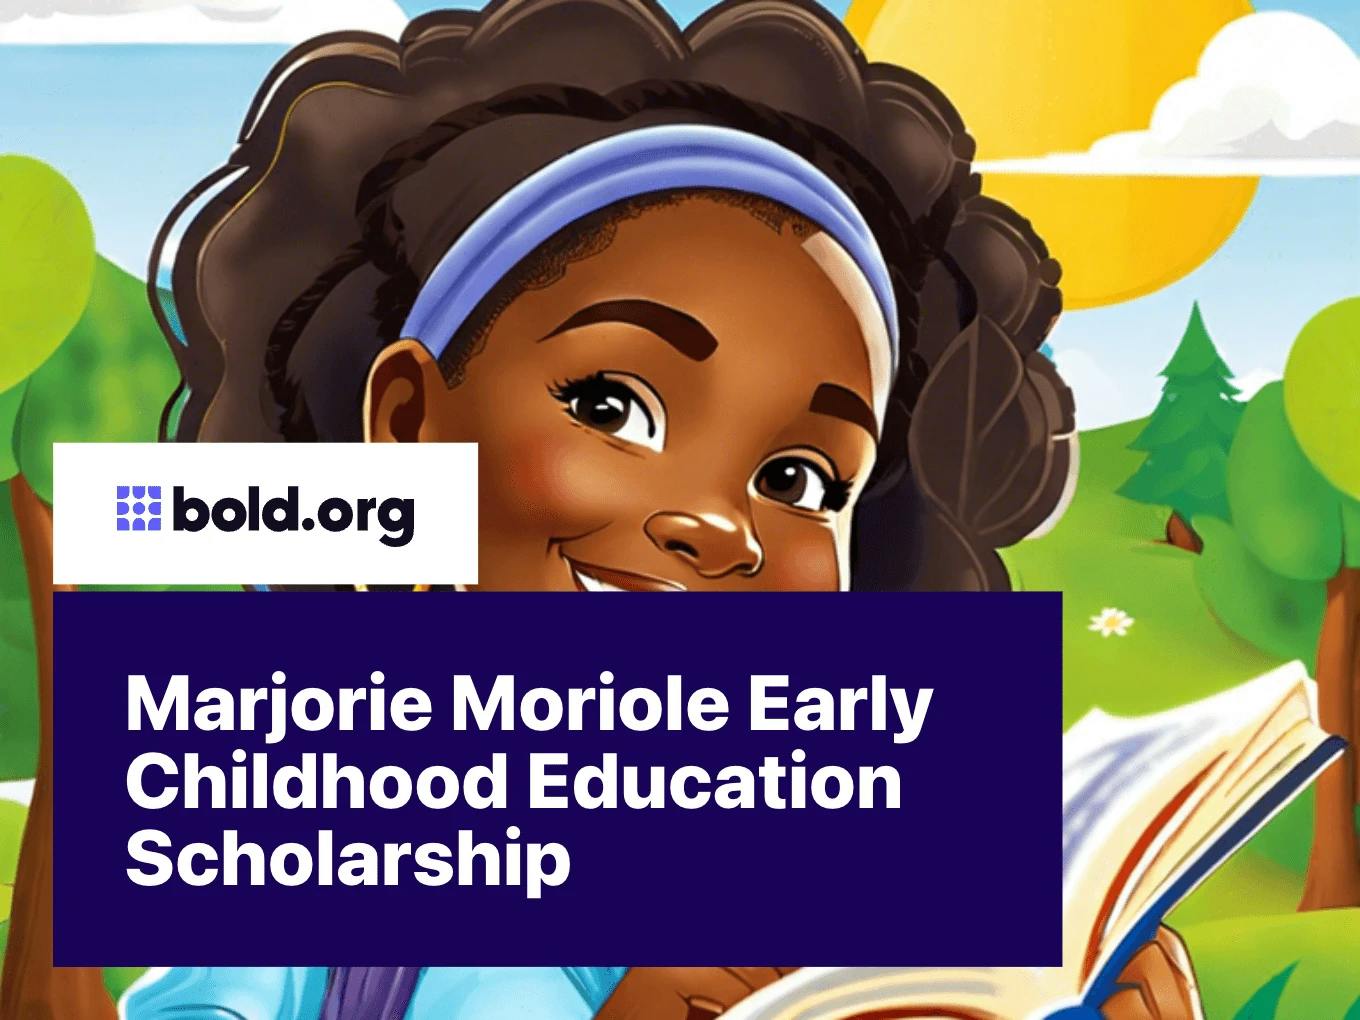 Marjorie Moriole Early Childhood Education Scholarship